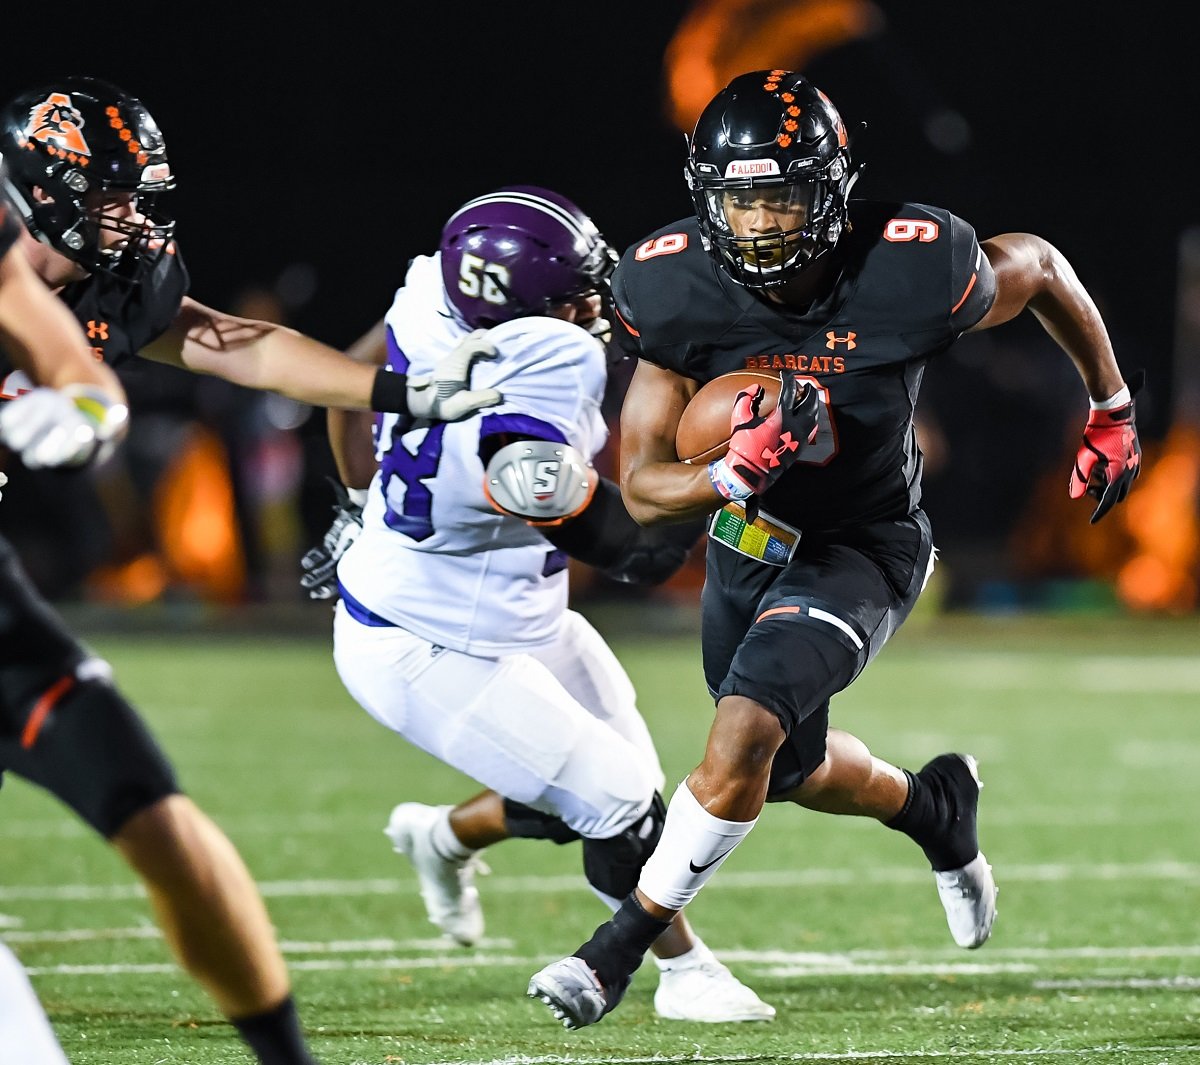 Aledo junior tailback Jase McClellan (9) may see action today after missing the last two games with an injury when the Bearcats host Arlington Seguin at 7:30 p.m. at Bearcat Stadium. Photo by Howard Hurd